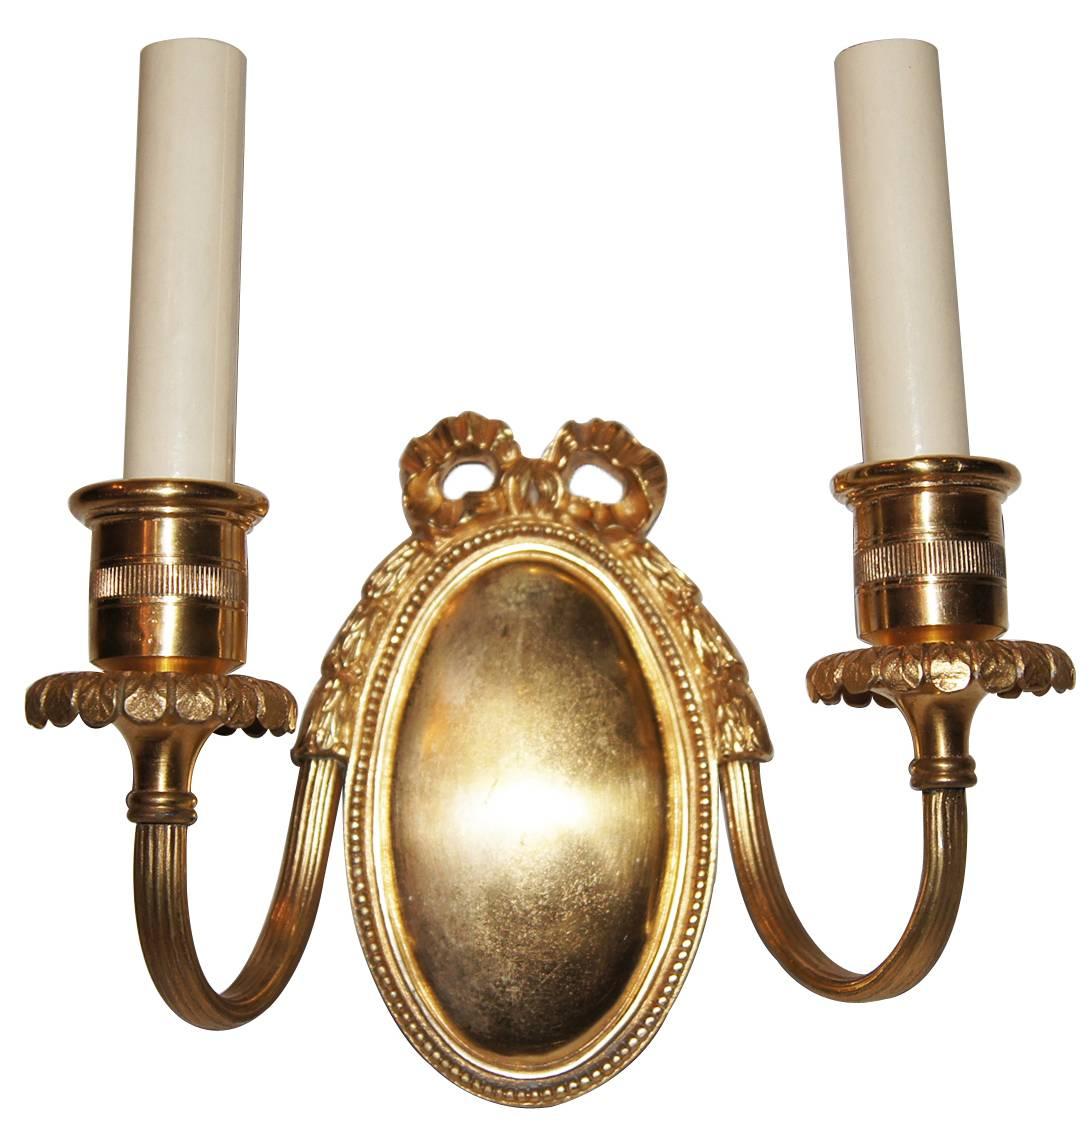 A pair of 1920s French gilt bronze, double-light sconces of neoclassic style, oval back plate, original finish.